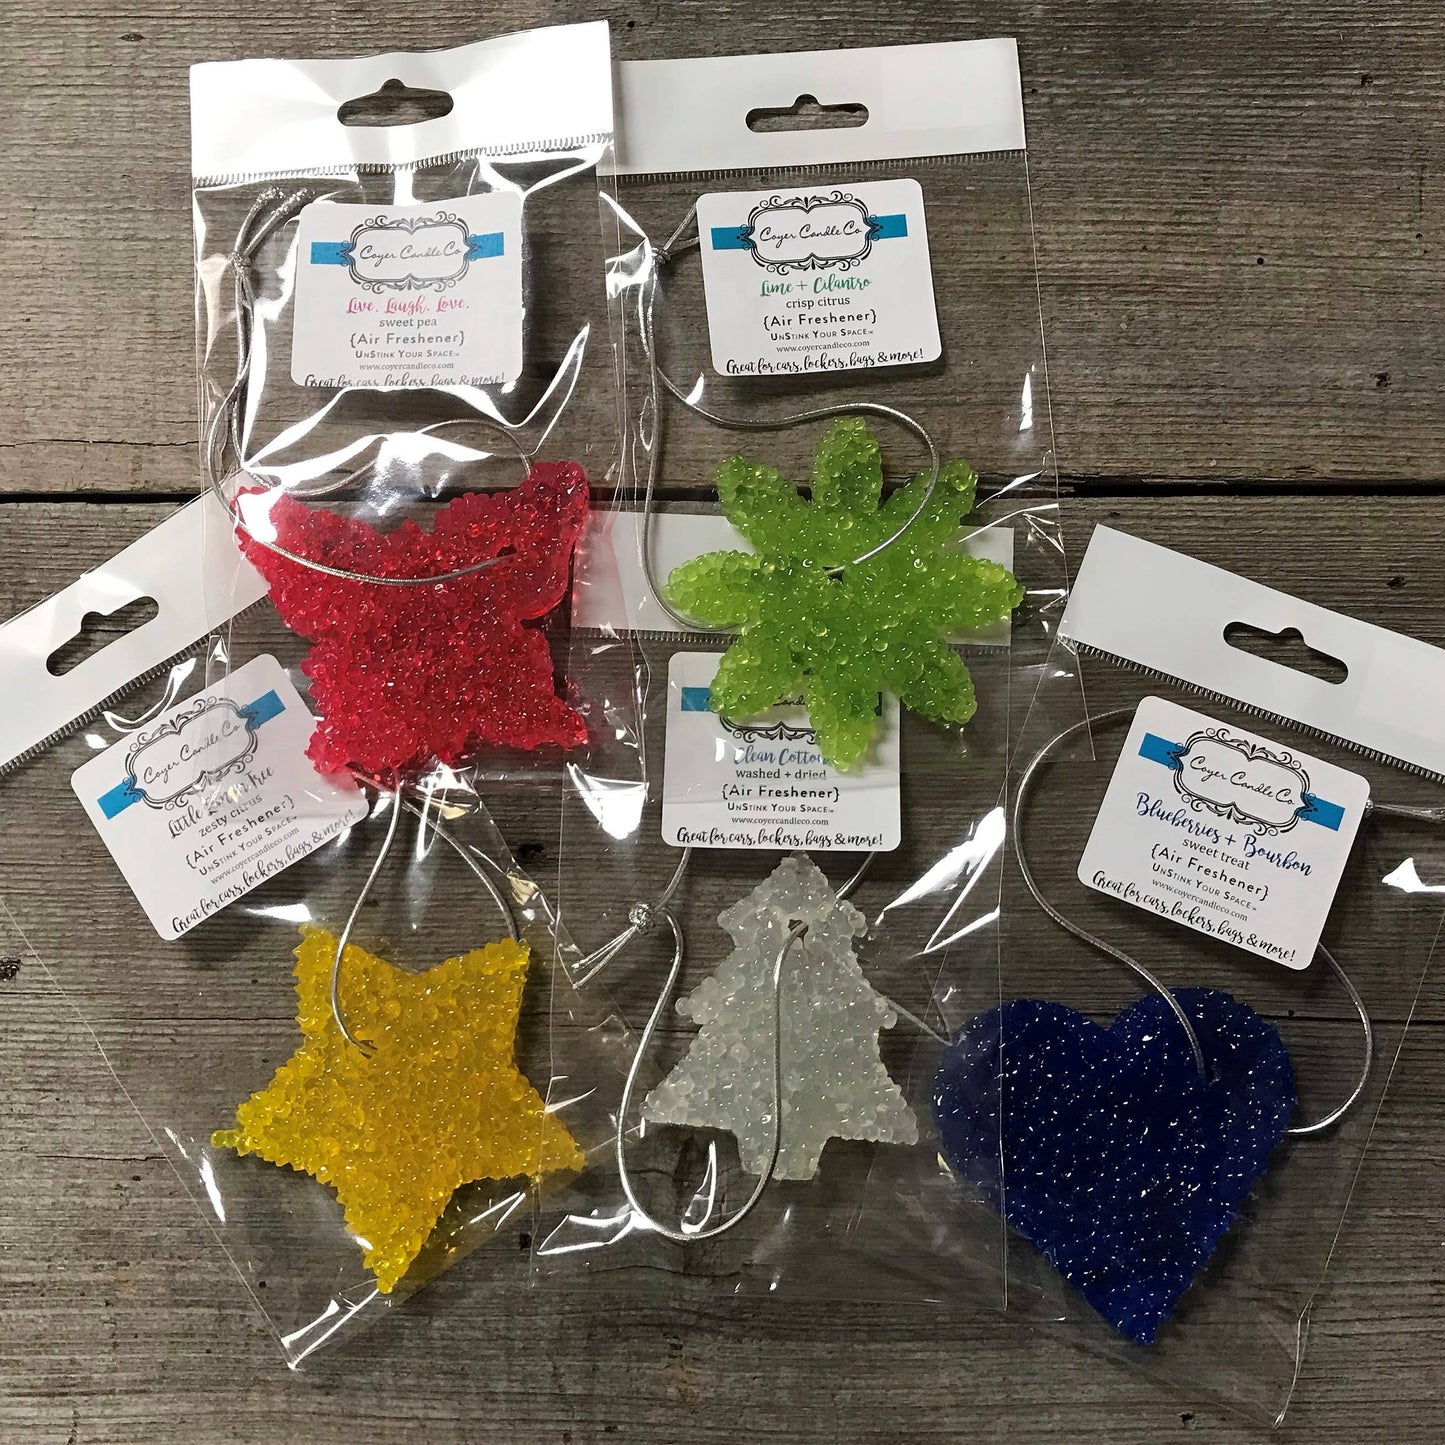 Pecans Star Shaped Air Fresheners - Signature Collection: Pecans 'n Maple Syrup / Star